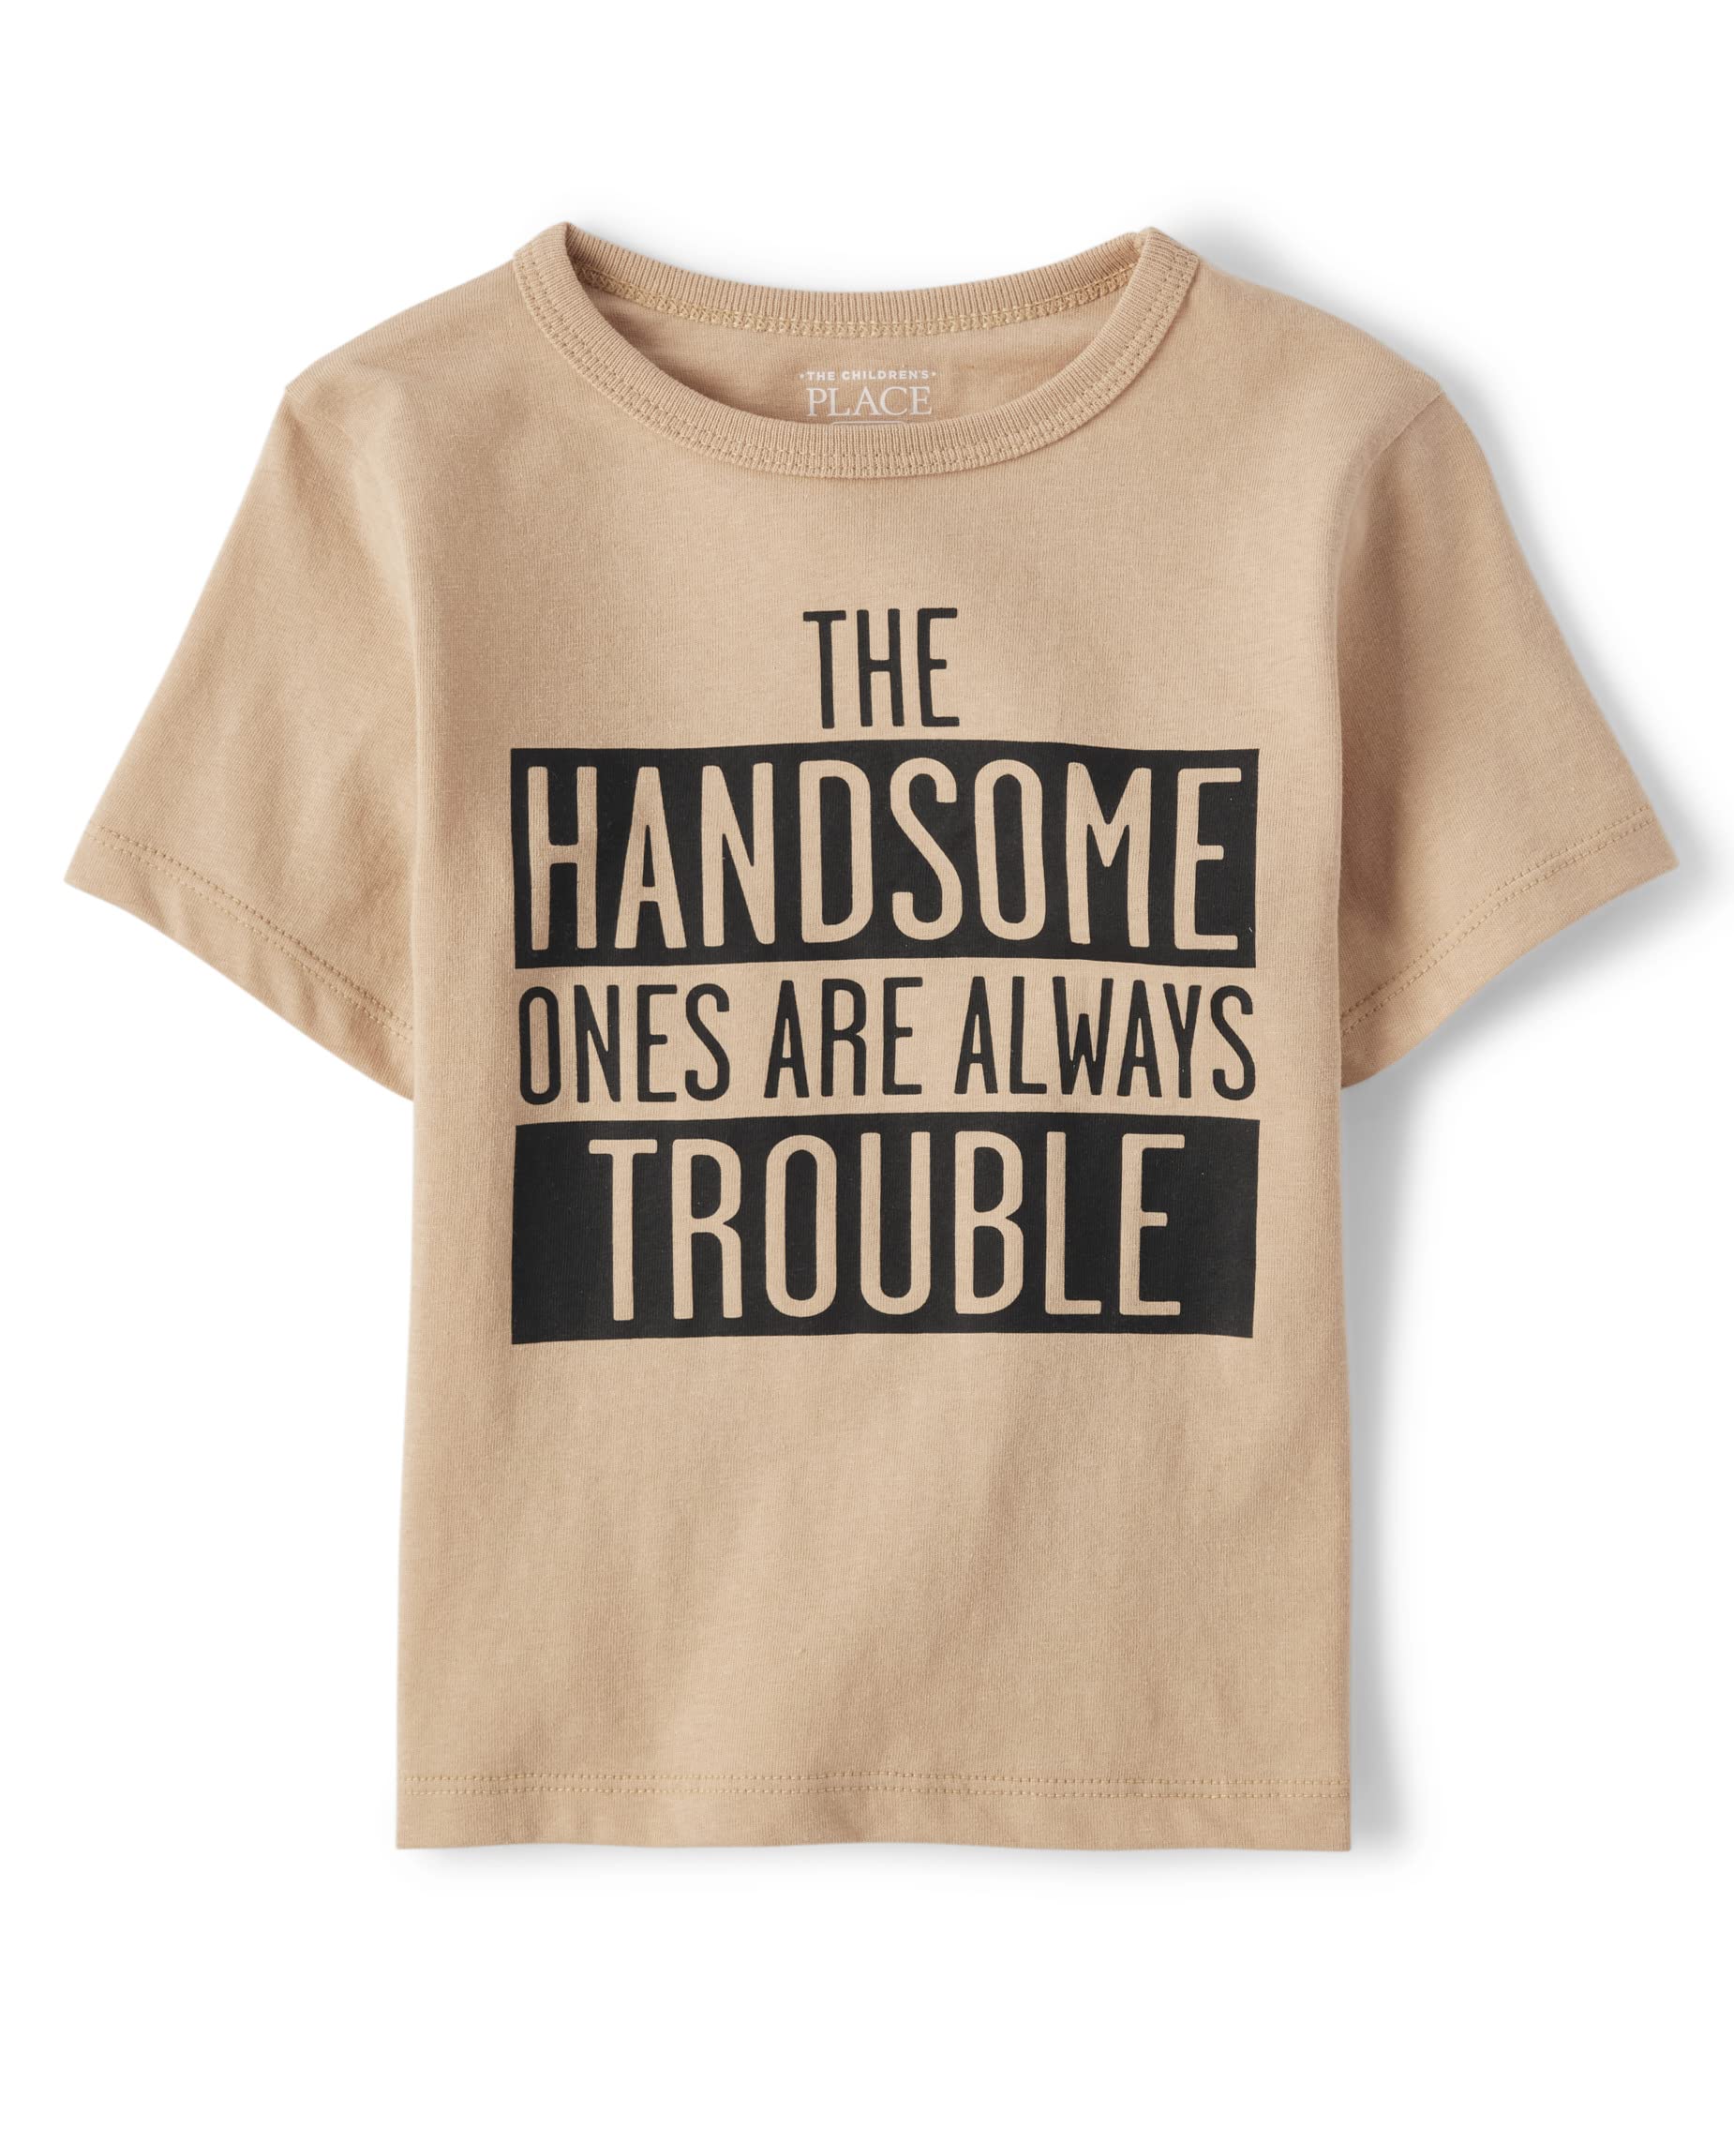 The Children's Place baby boys Handsome Trouble Short Sleeve Graphic T shirt